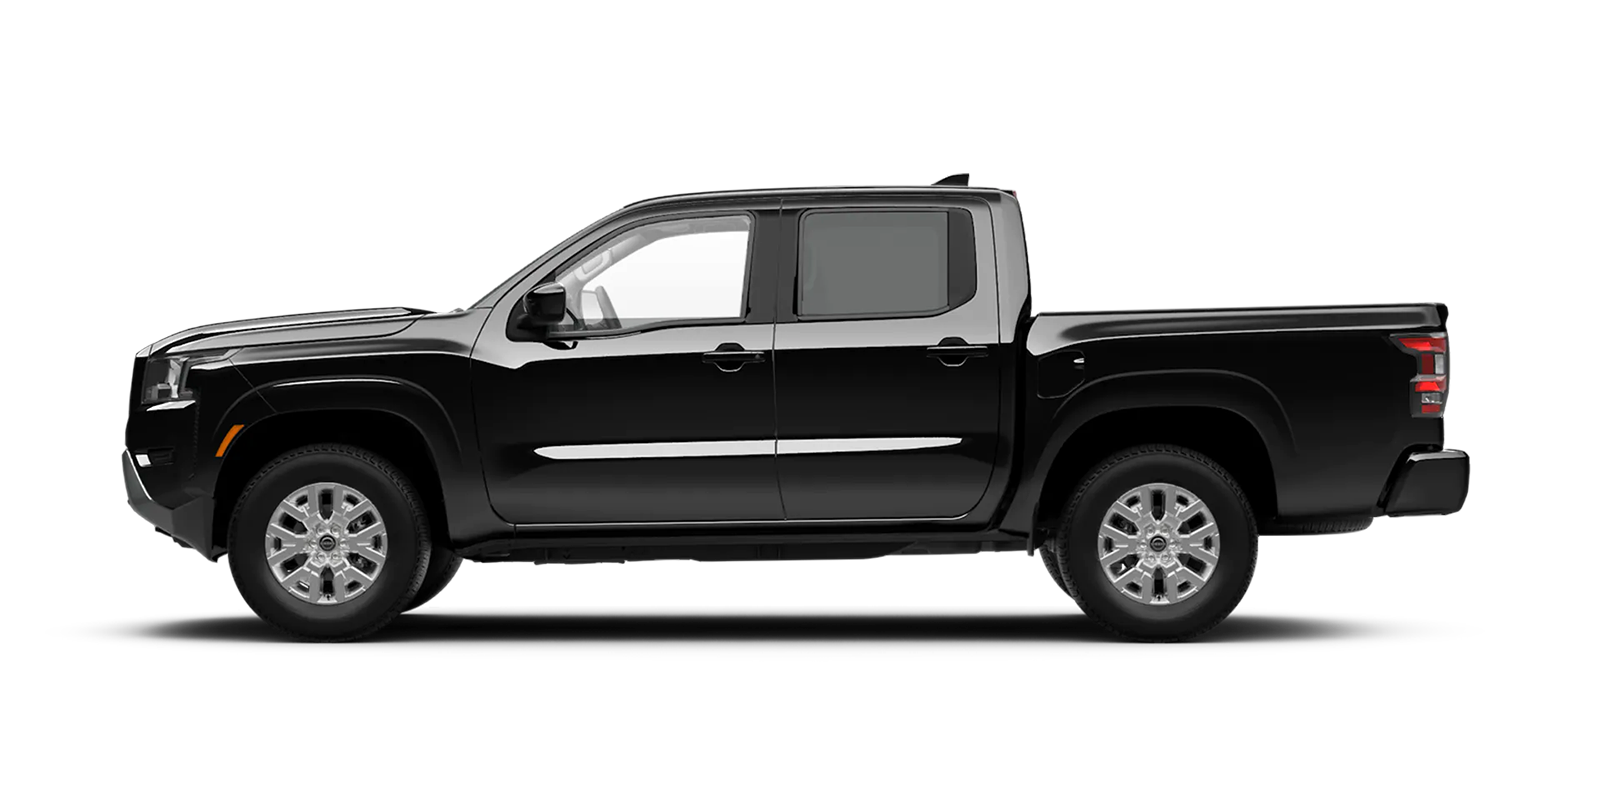 2022 Frontier Crew Cab SV 4x4 in Super Black | Cherokee County Nissan in Holly Springs GA